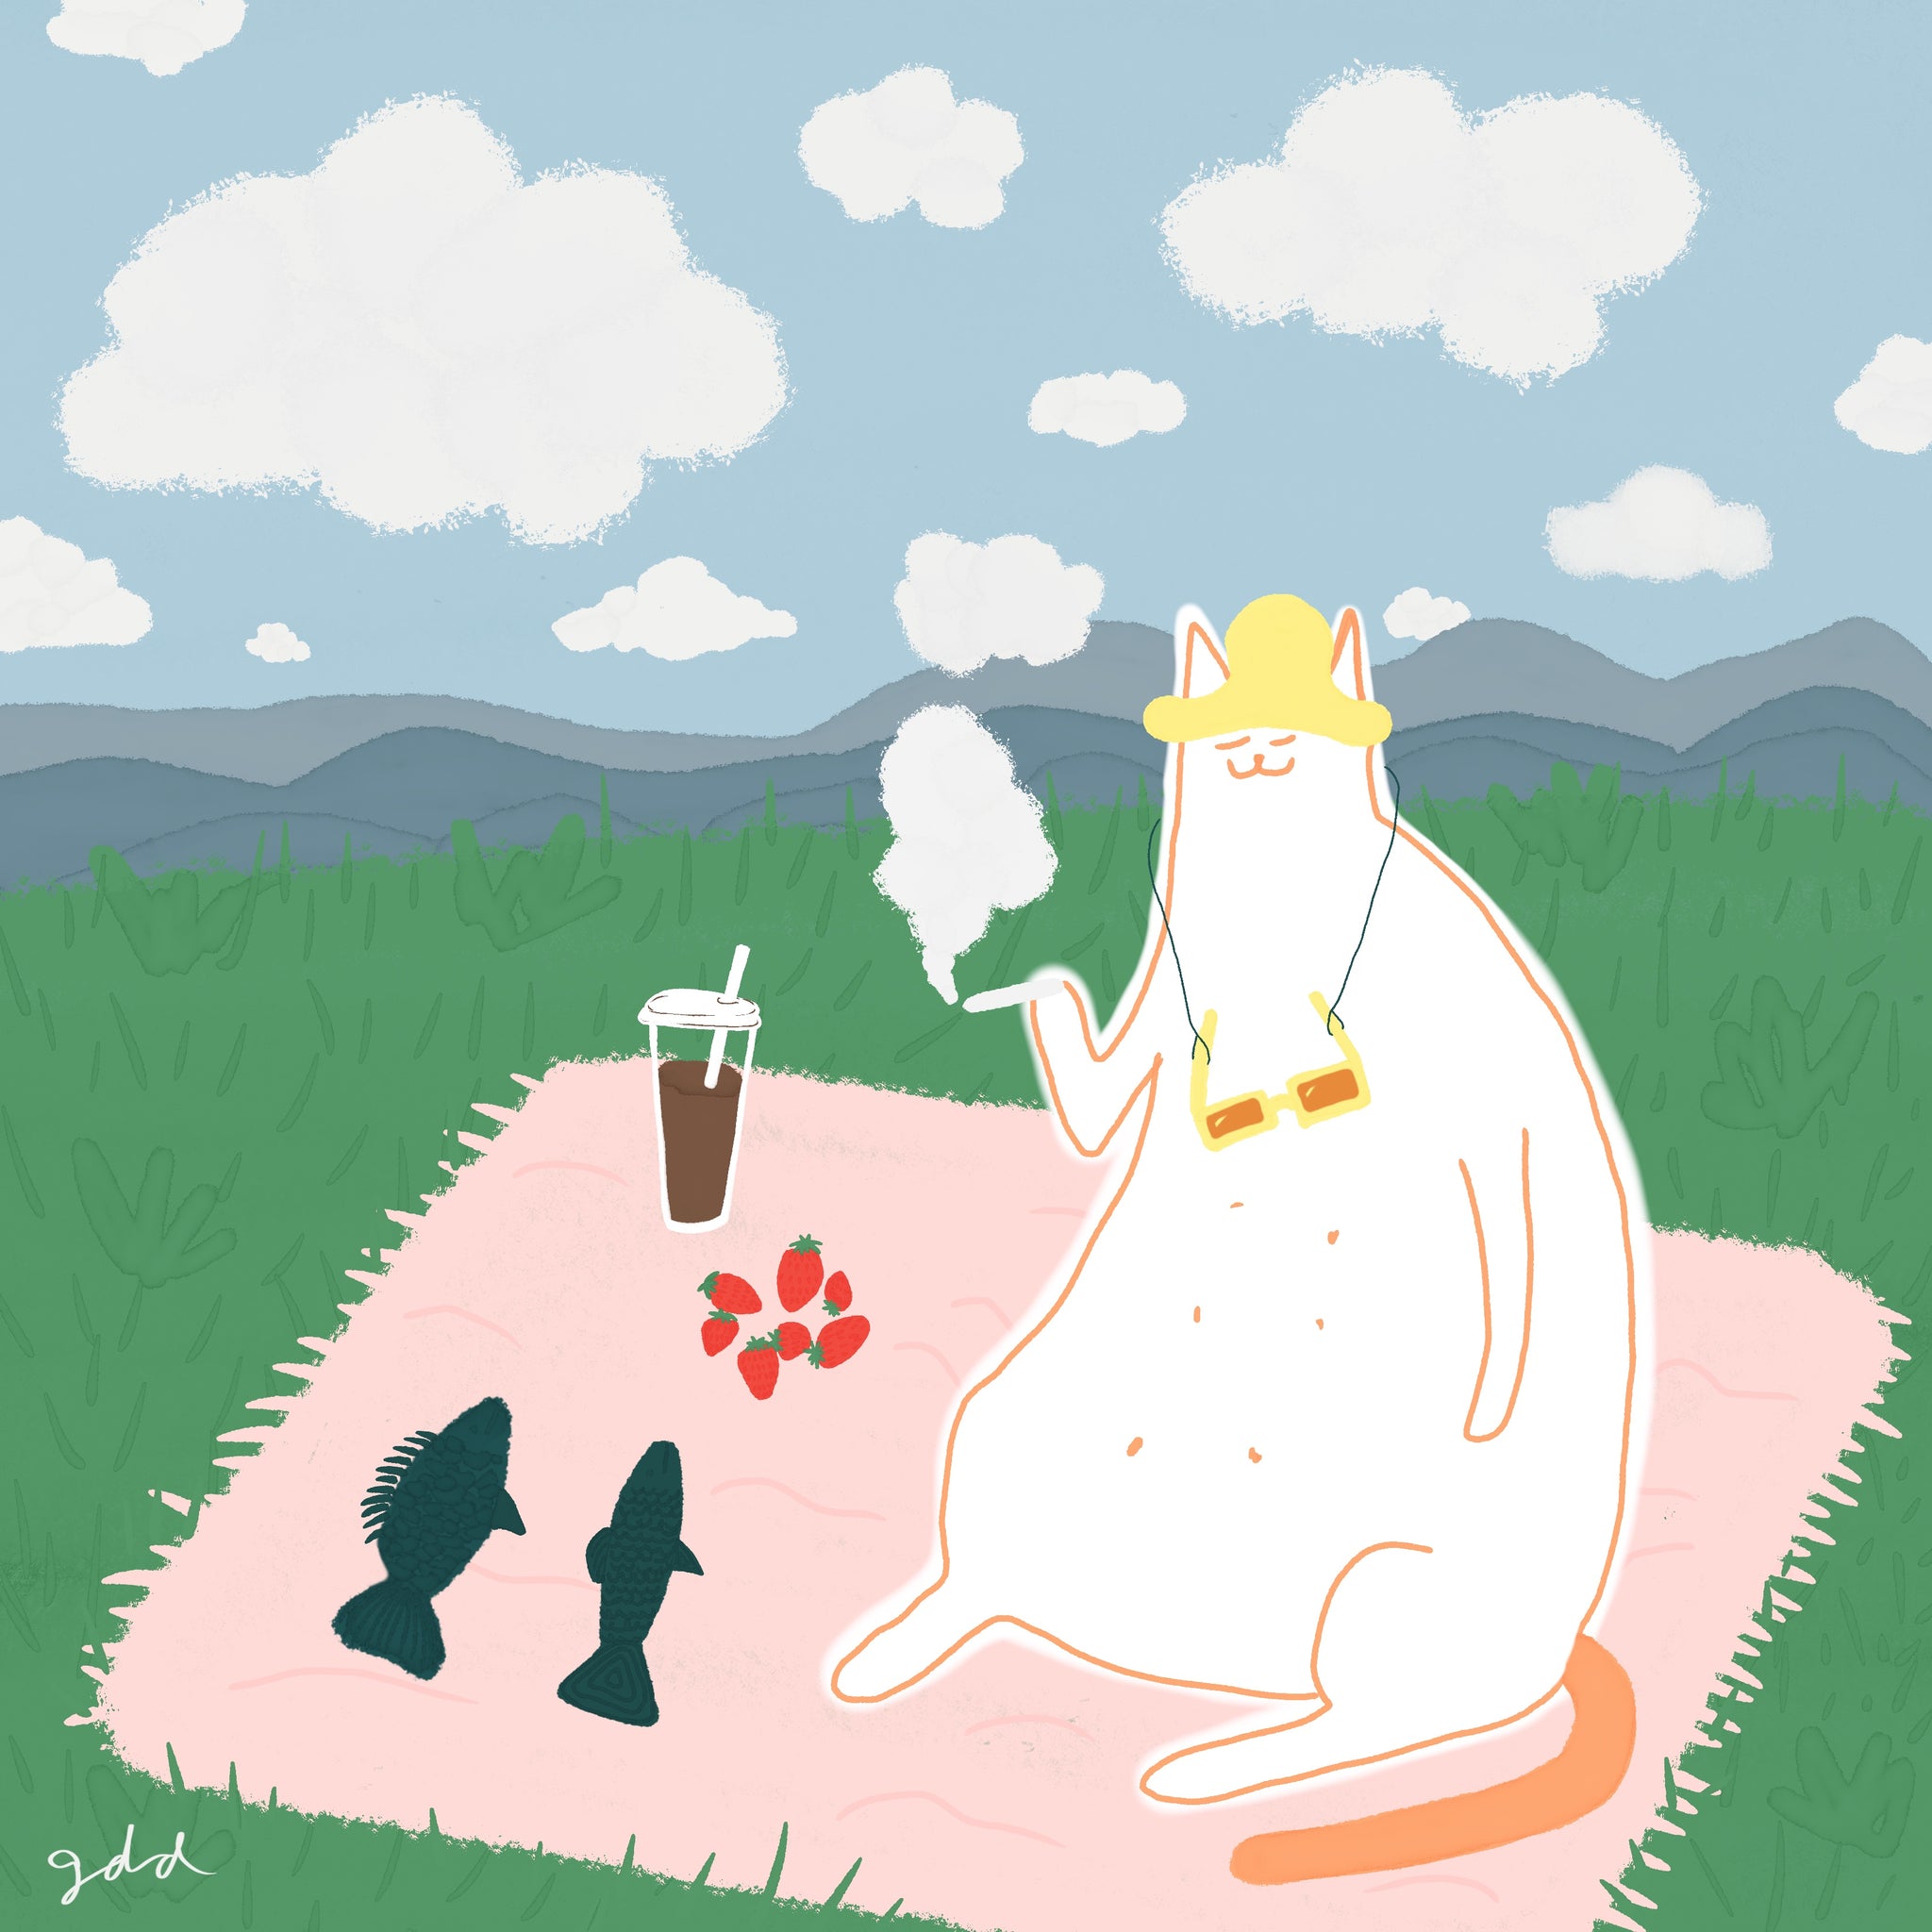 A white and orange cat has a picnic by himself on the grass. There are mountains and clouds in the background. The cat is wearing a hat and has sunglasses around its neck. There is an iced coffee, strawberries and 2 fish laid out next to the cat. The cat is also smoking a joint. Peace and love, Good Dog Draws